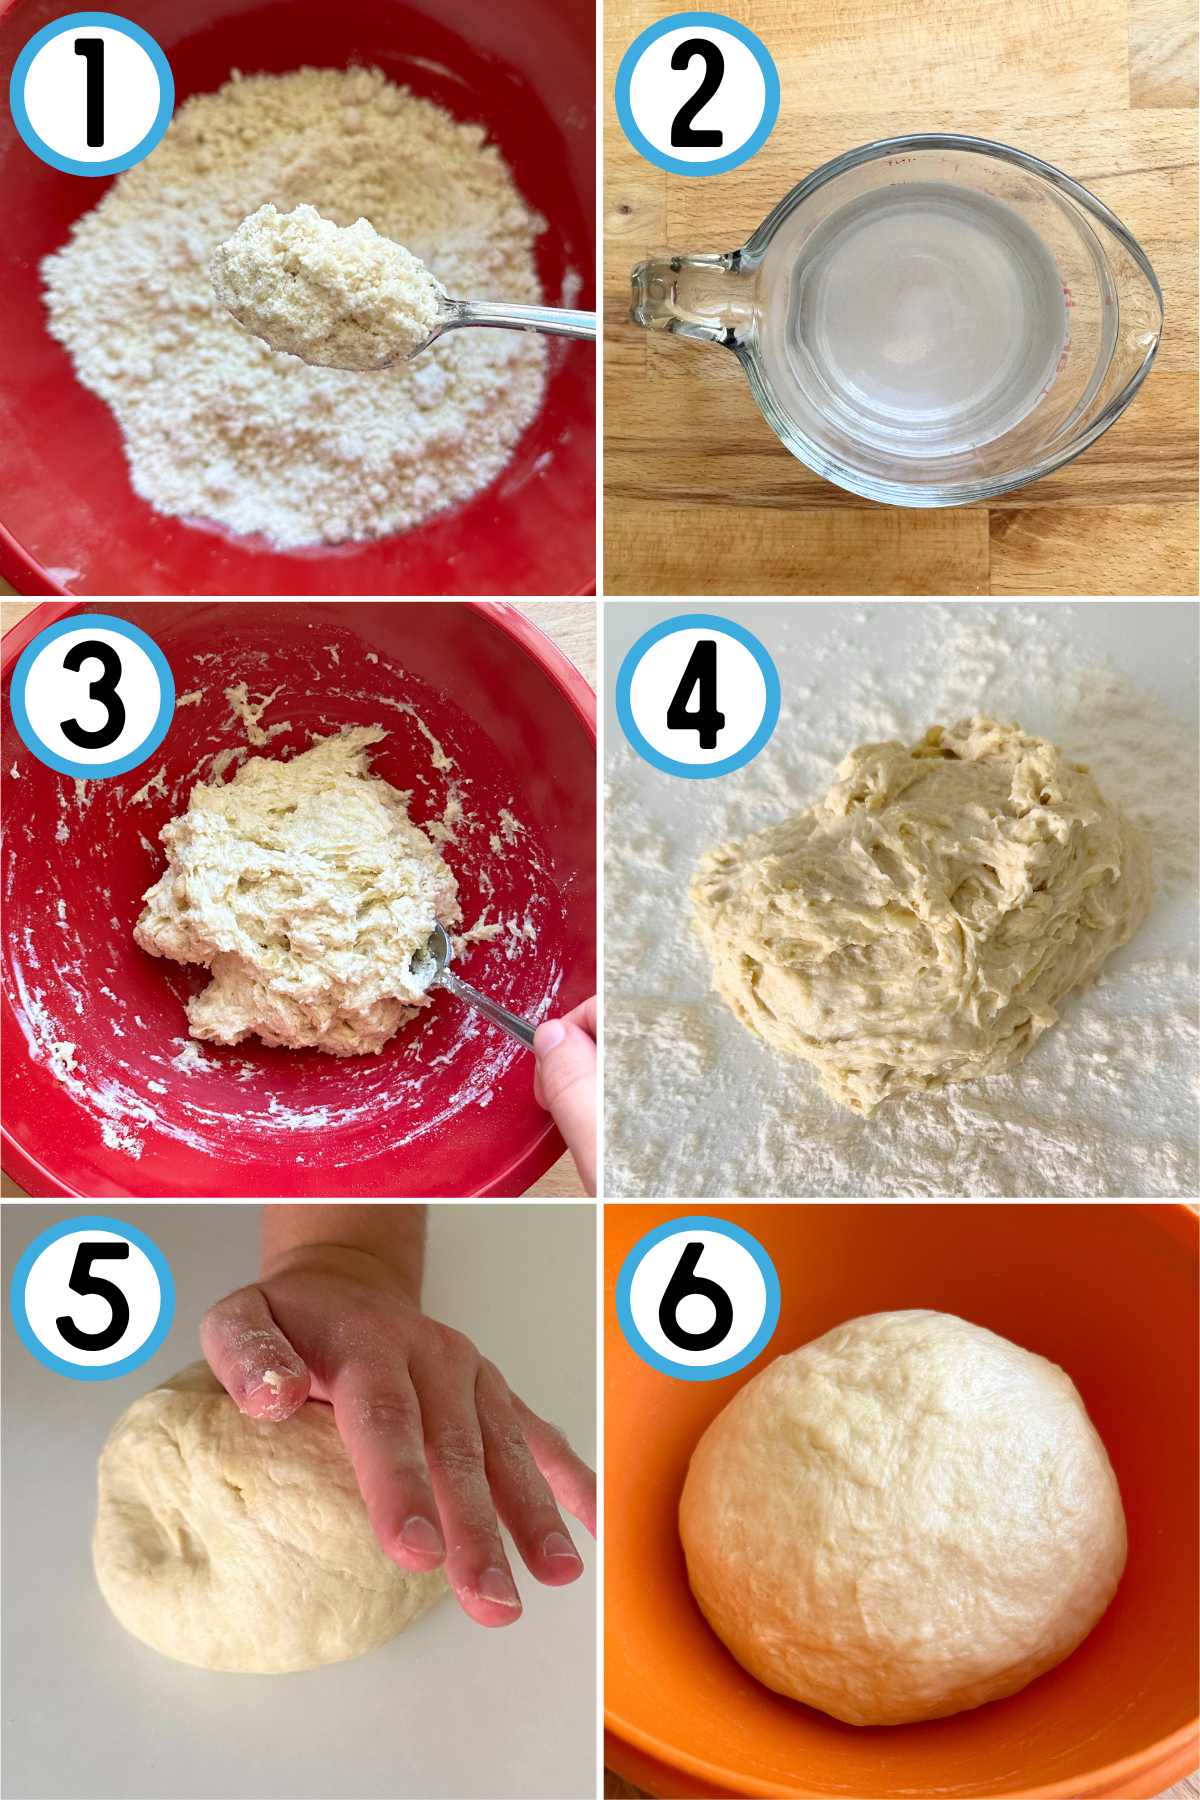 Step by step directions for making tortilla dough: 1. Crumbly mixture of flour and oil. 2. Salt dissolved in water. 3. Rough dough form. 4. Dough placed on a floured surface. 5. Hand kneading the dough into a ball. 6. Smooth dough ball resting in a bowl.